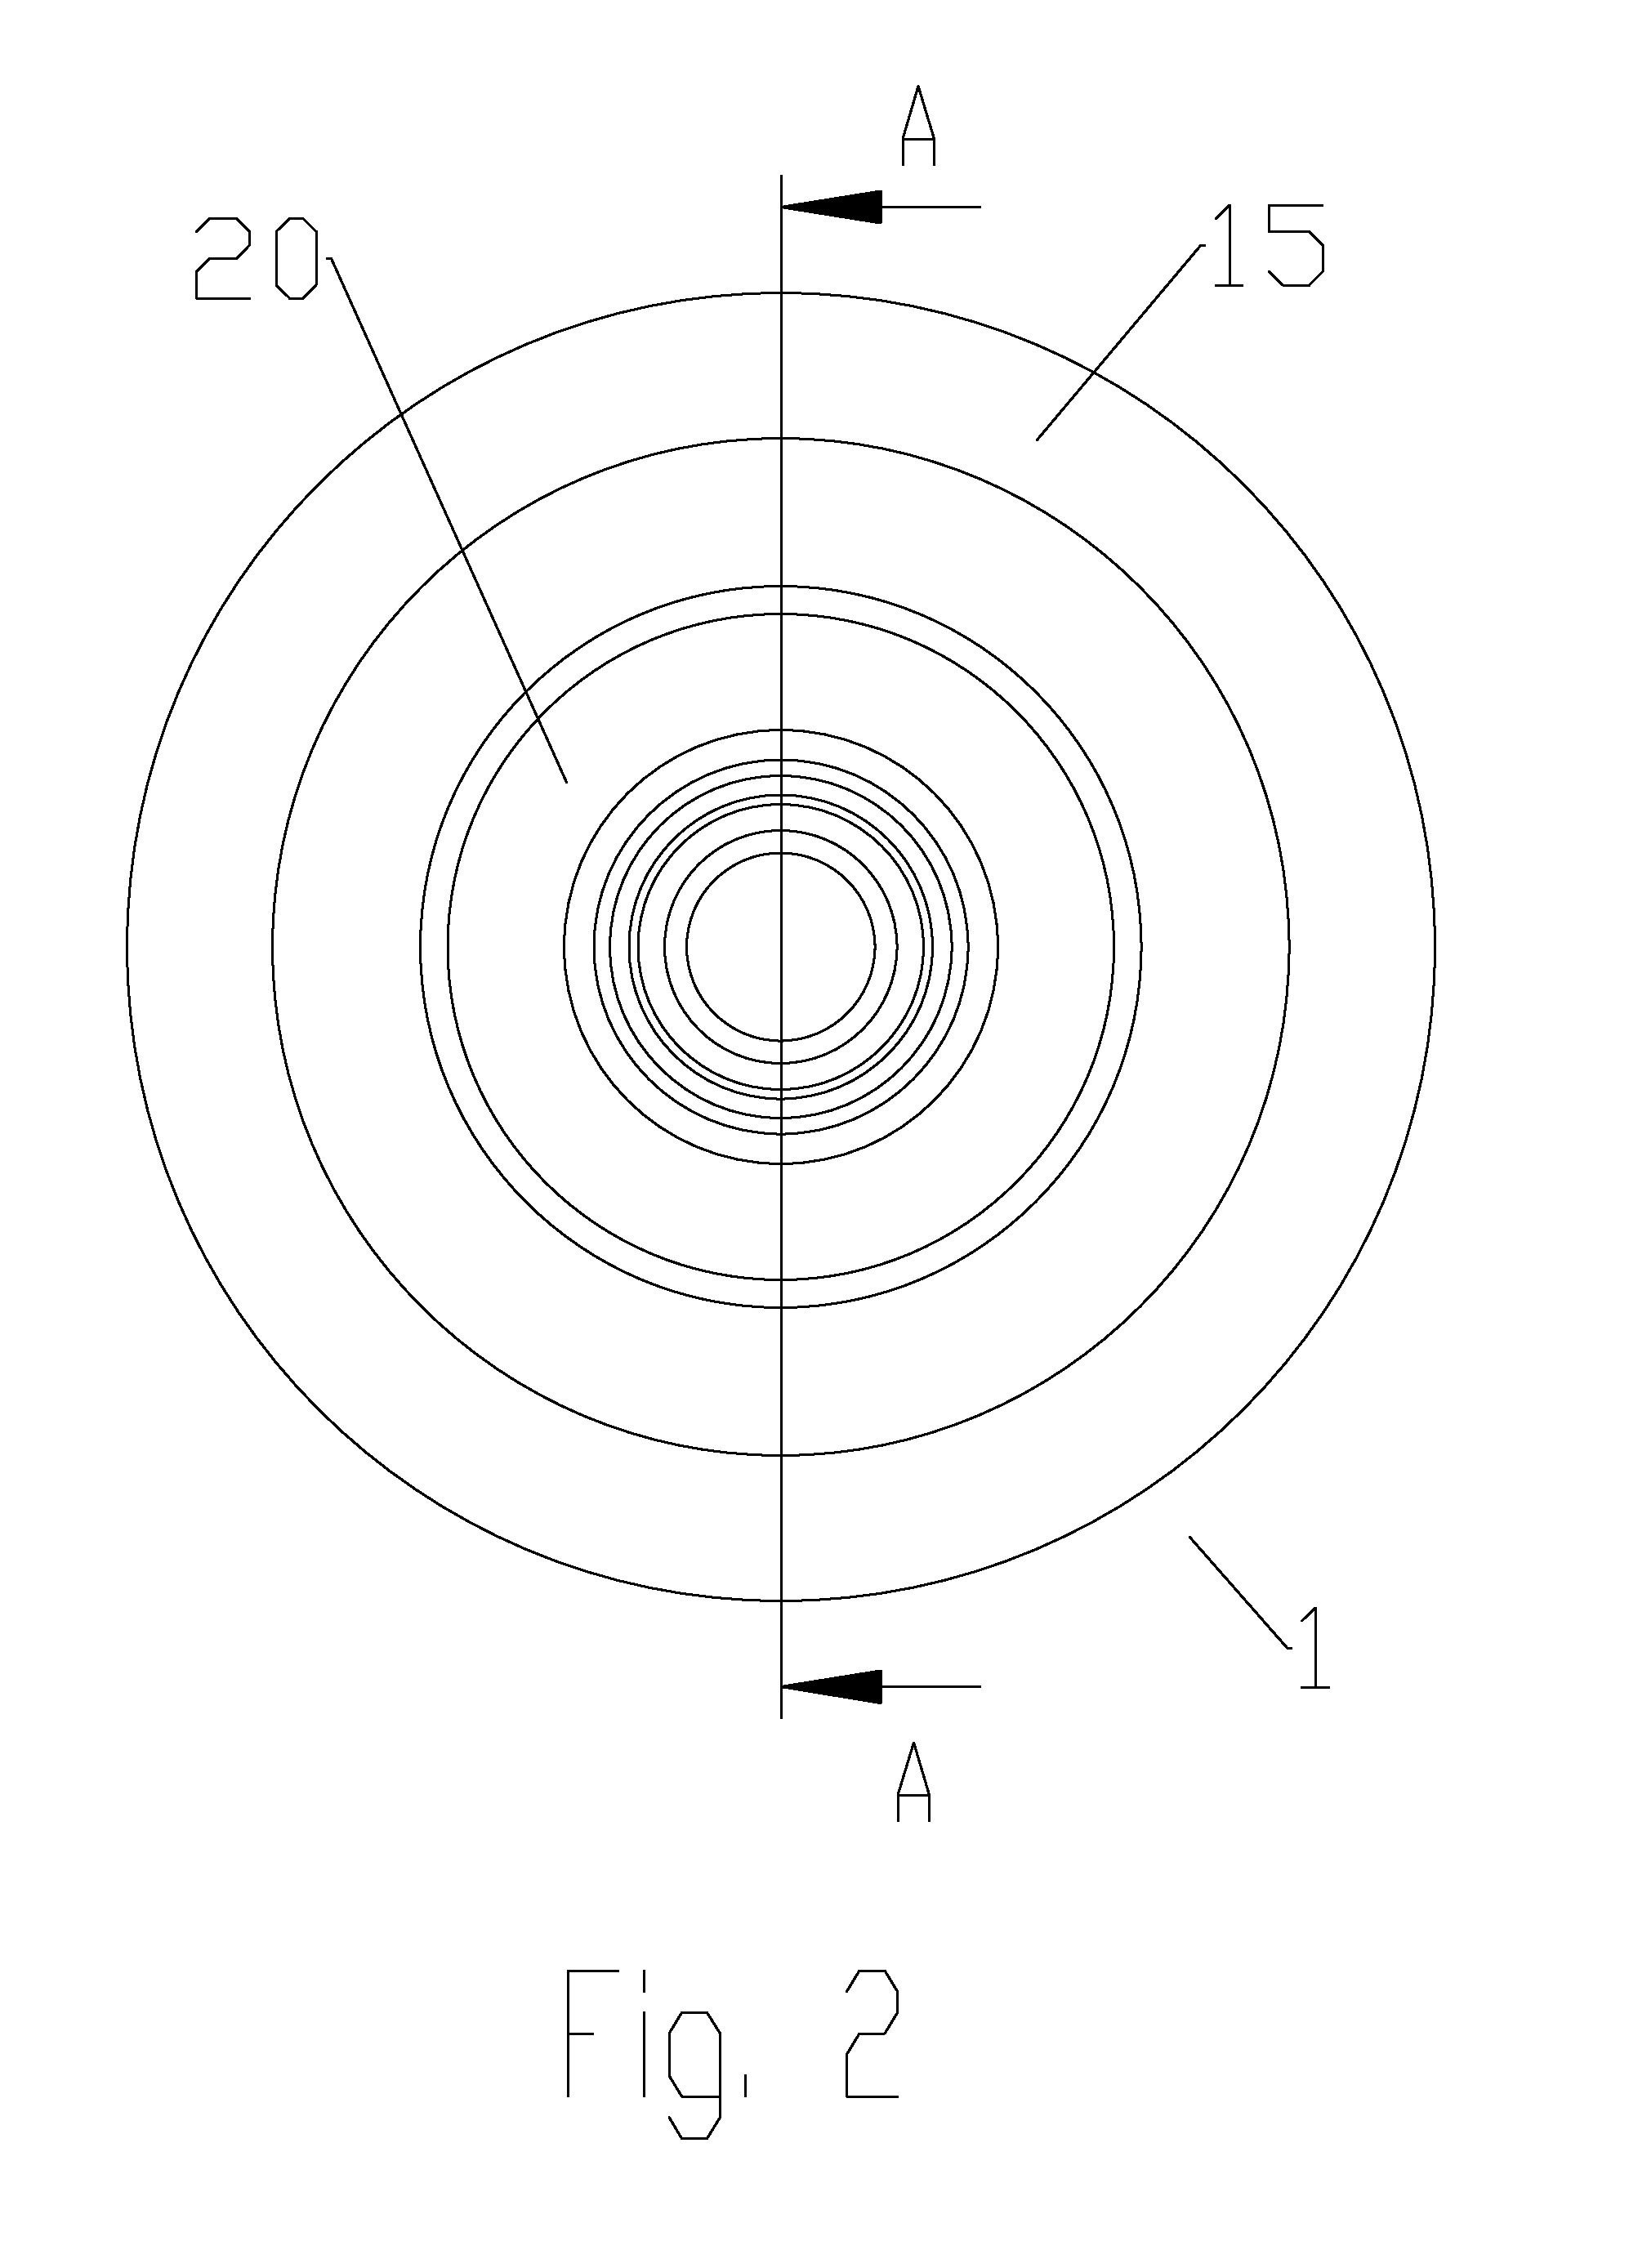 Dielectric lens cone radiator sub-reflector assembly